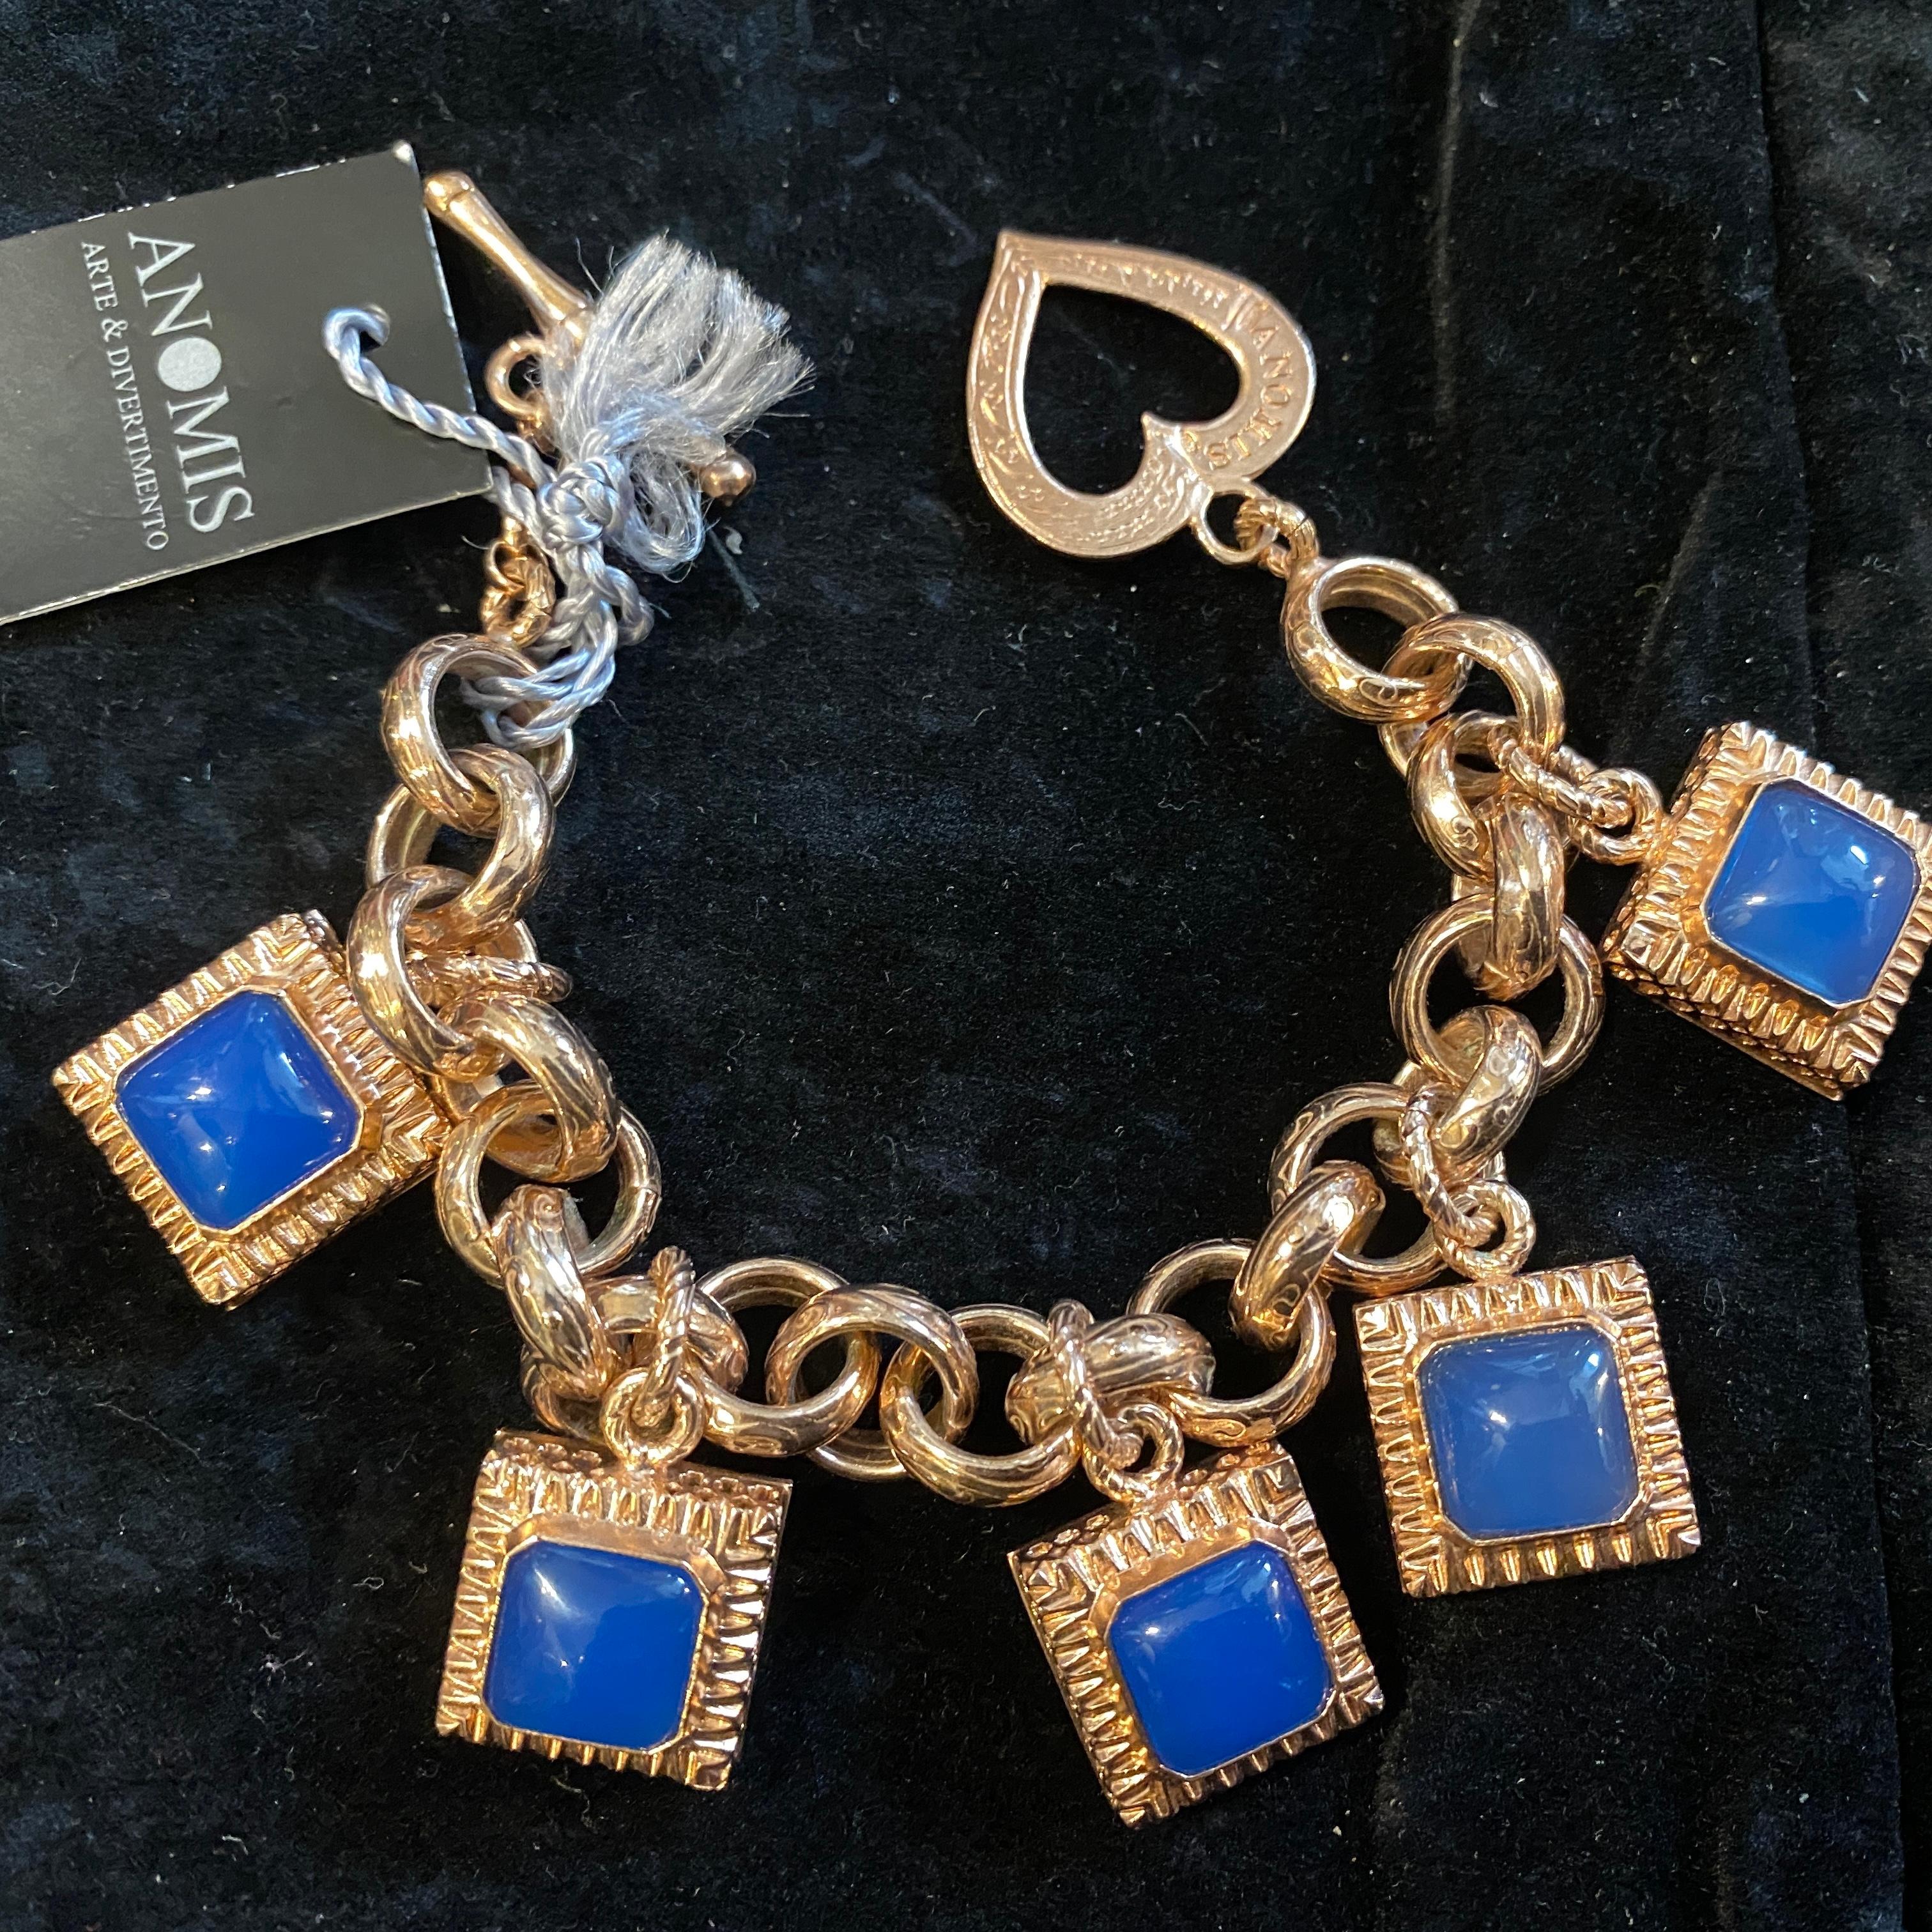 An high quality charm bracelet designed and manufactured in Italy by Anomis in the Nineties, the square cabochon blue agate are in pefect condition as the gilded  sterling silver parts.